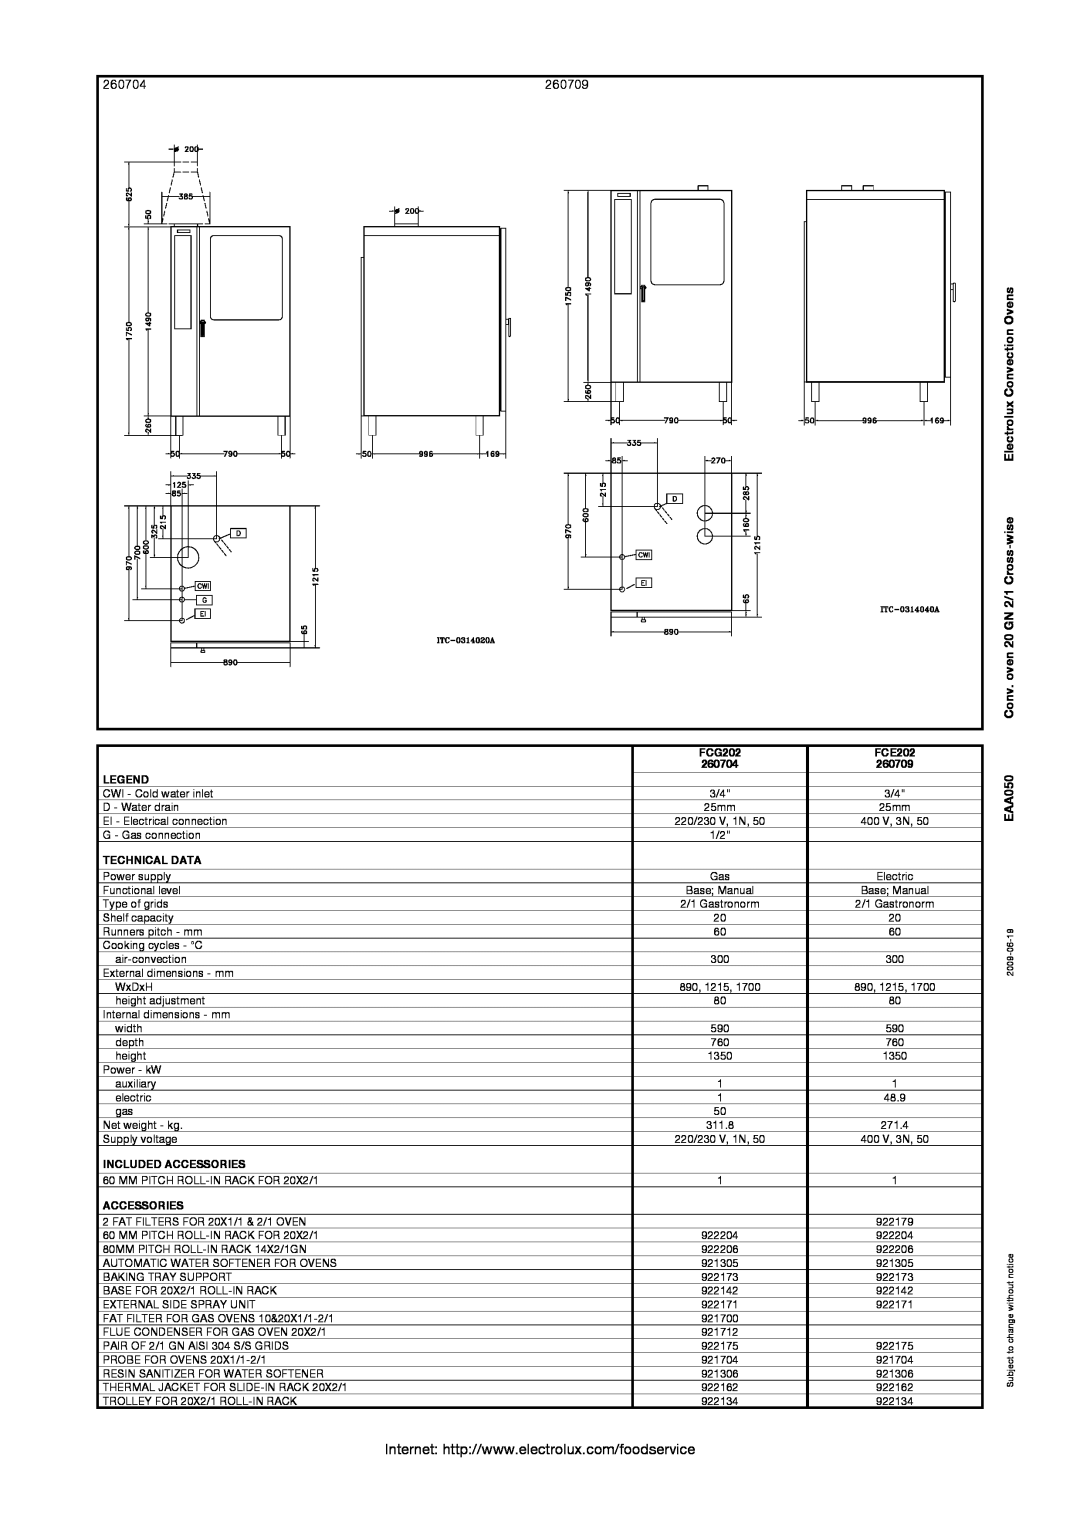 Electrolux 260704 260709, Electrolux Convection Ovens, Conv. oven 20 GN 2/1 Cross-wise, FCG202, FCE202, Technical Data 